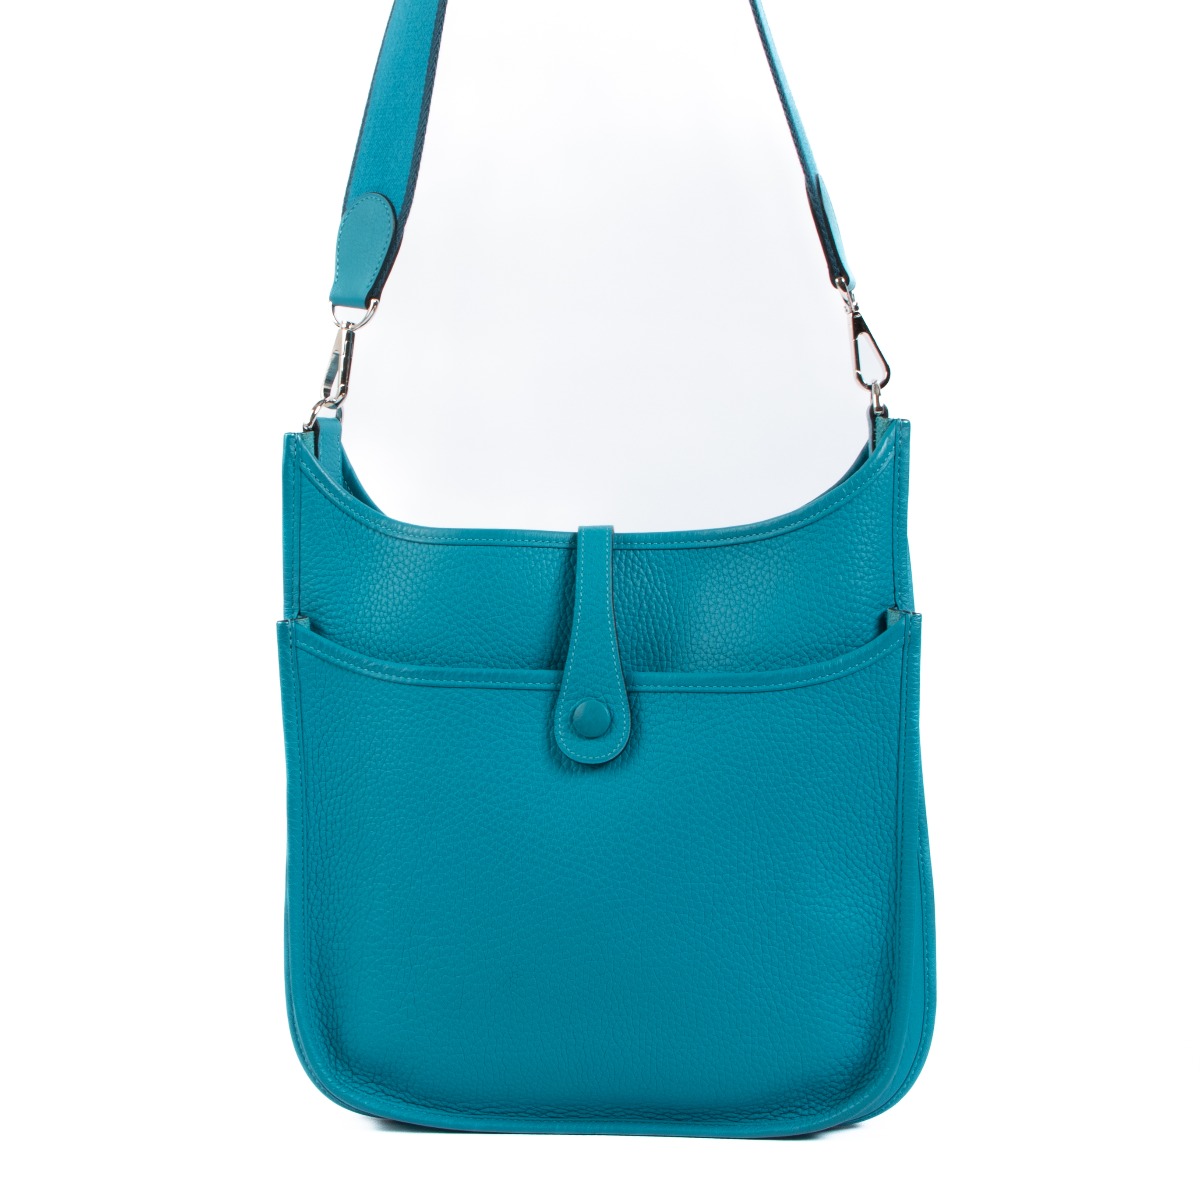 Hermès, Clemence Evelyne III in Colvert Turquoise